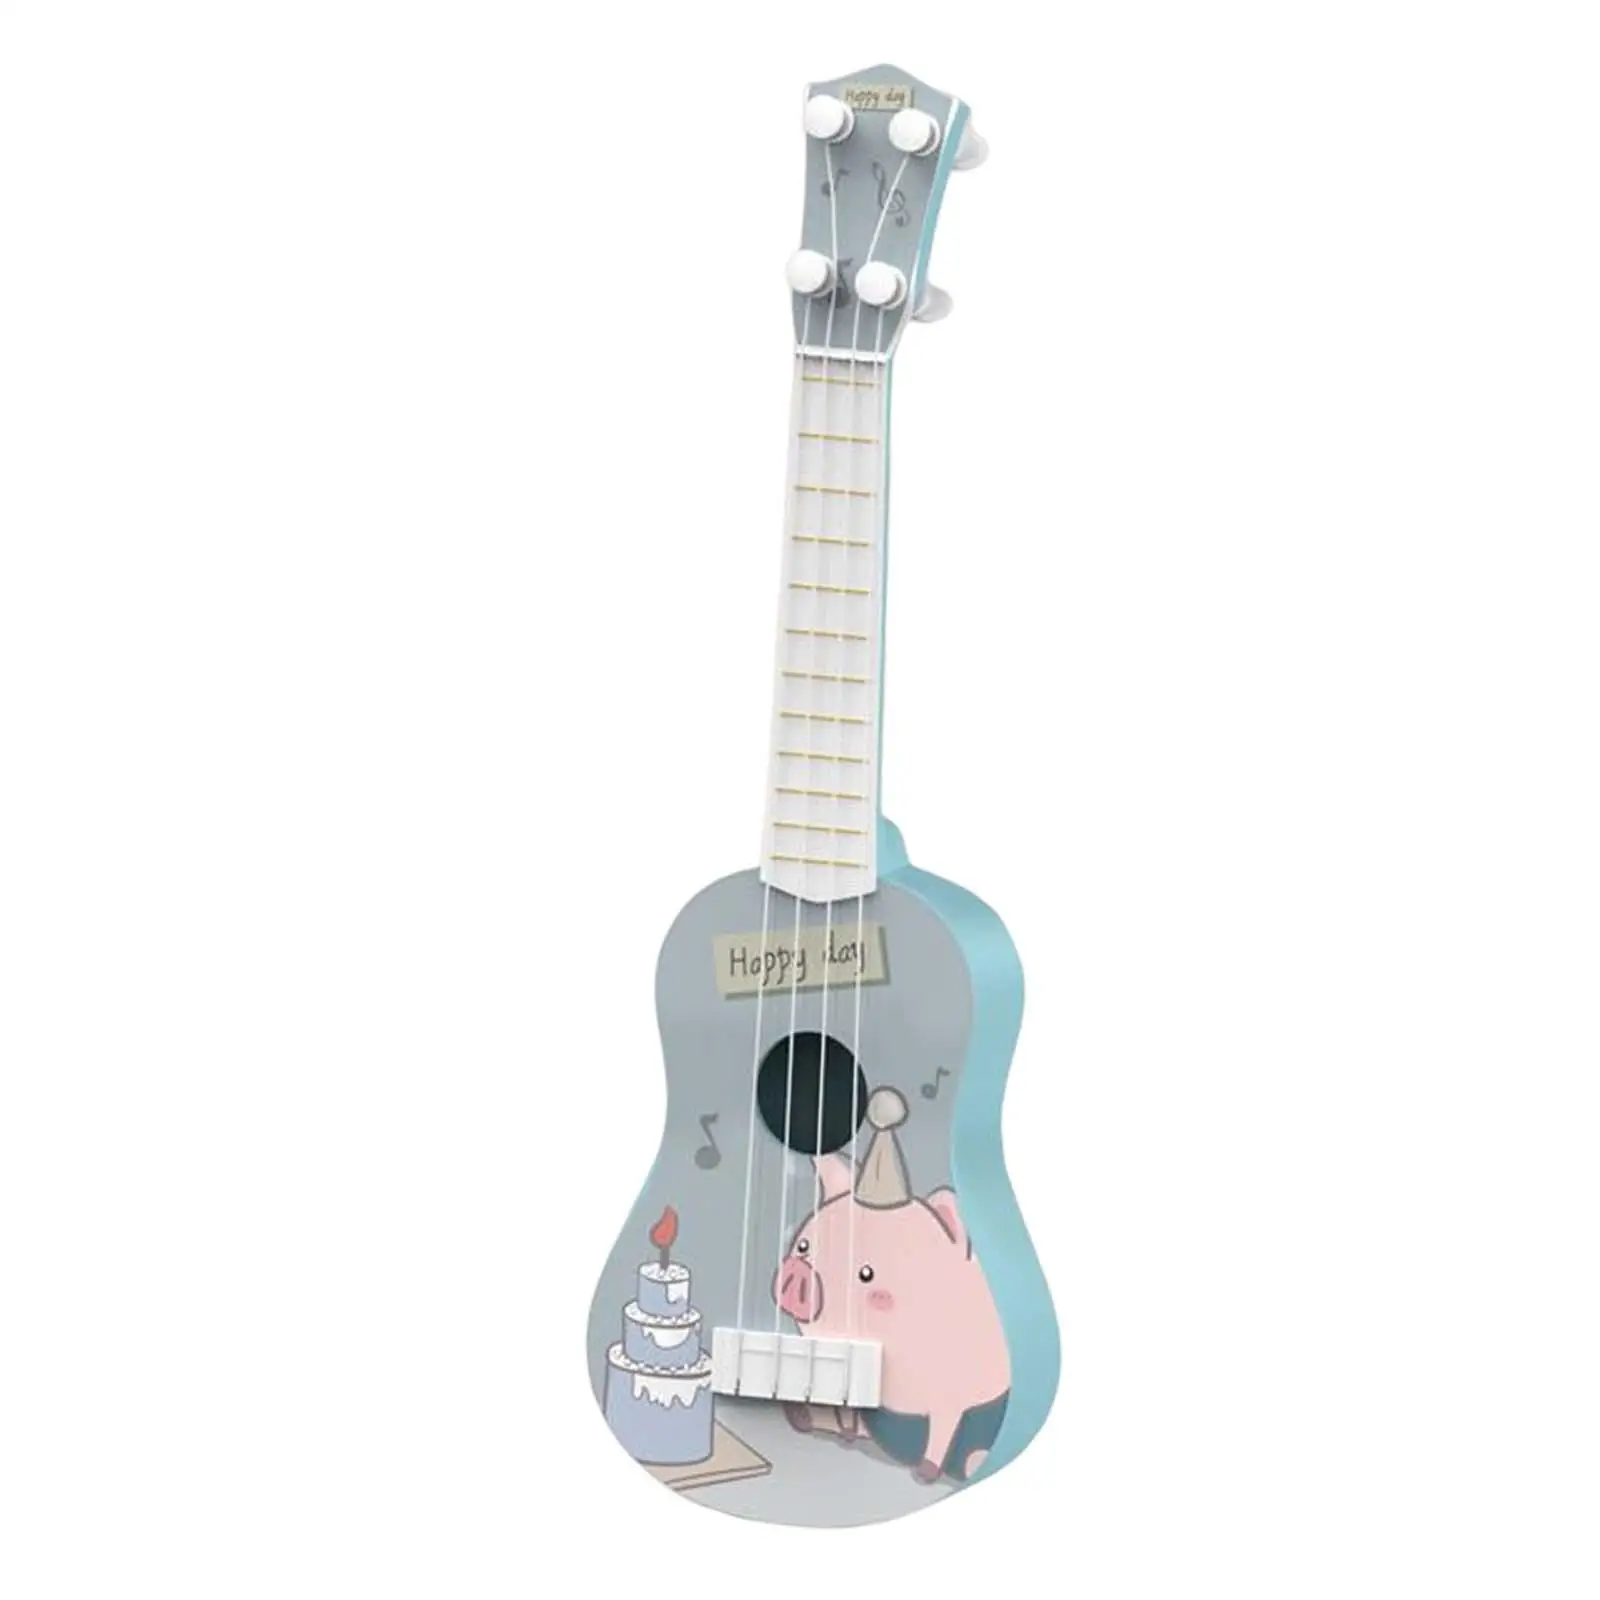 Portable Kids Ukulele Toys Learning Education Toy with 4 String Musical Instrument Toy for Toddlers Kids Beginner Birthday Gifts